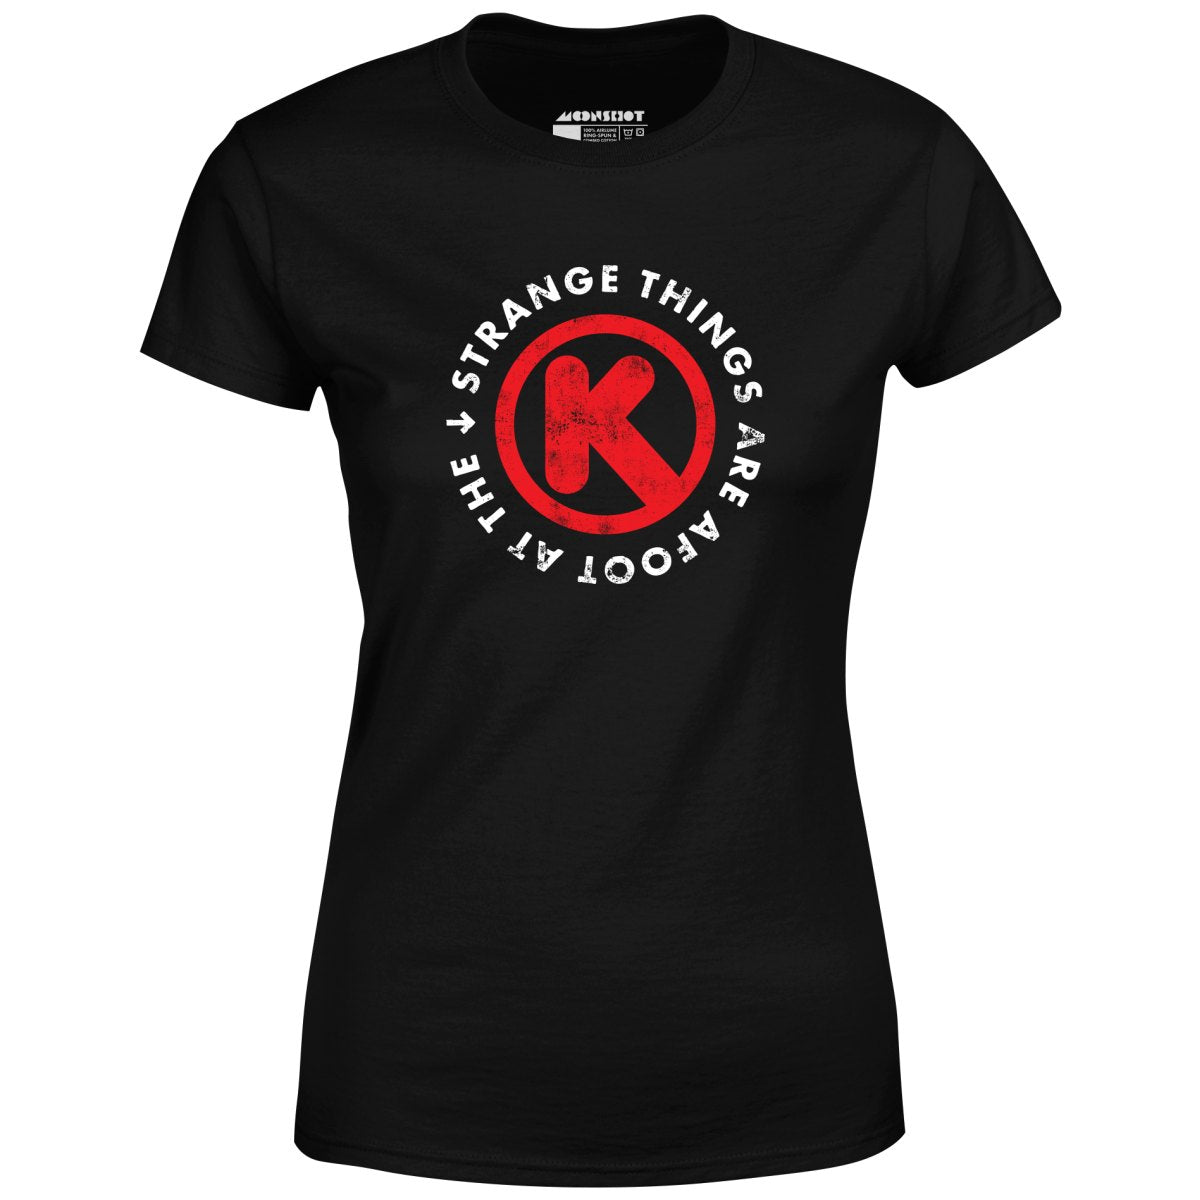 Strange Things are Afoot at the Circle K - Women's T-Shirt